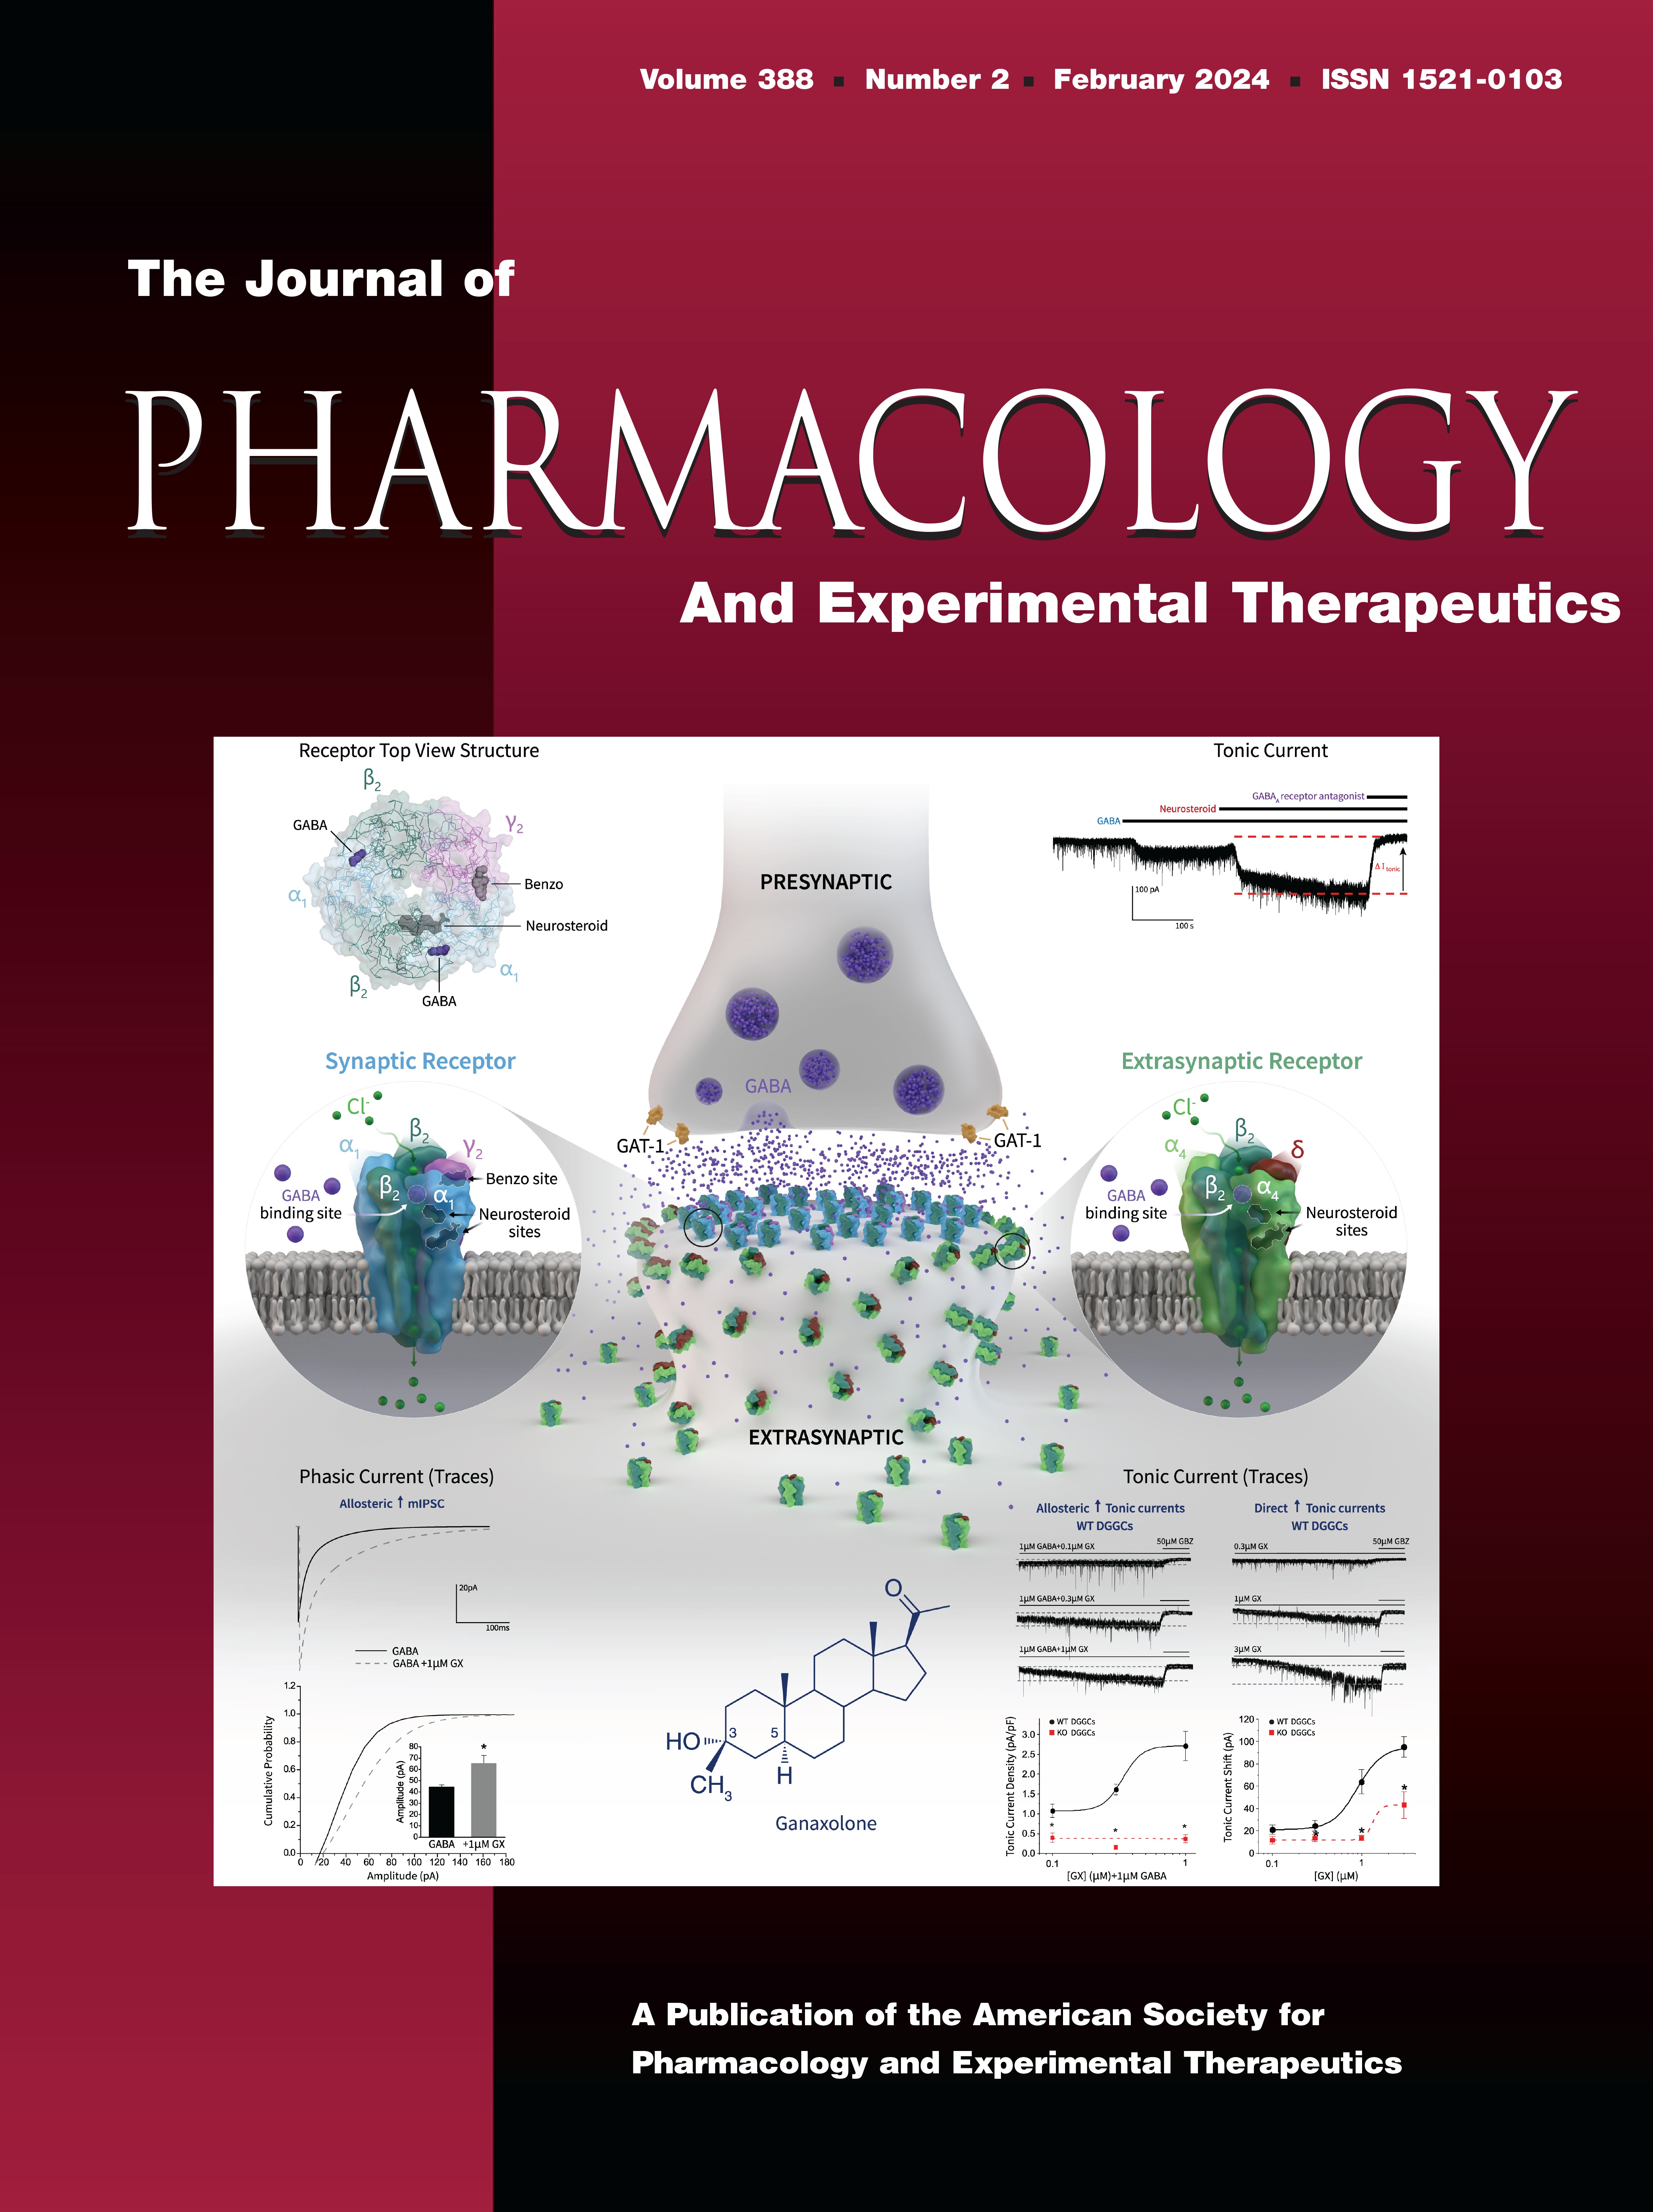 Pharmacologic Inhibition of Transient Receptor Potential Ion Channel Ankyrin 1 Counteracts 2-Chlorobenzalmalononitrile Tear Gas Agent-Induced Cutaneous Injuries [Special Section on Medical Countermeasures]